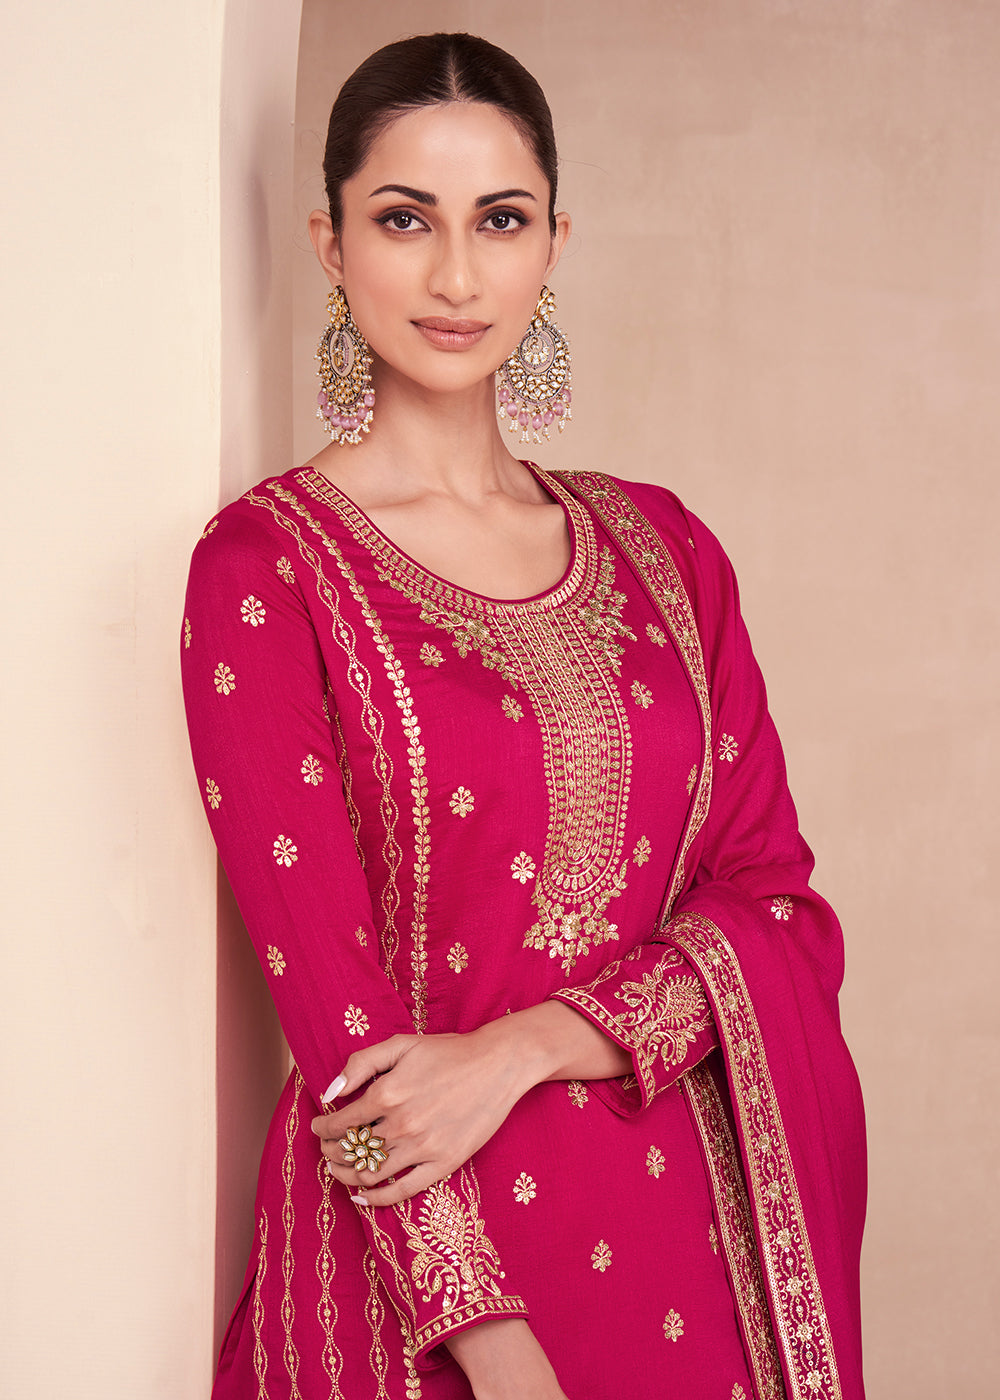 Buy Now Captivating Hot Pink Zari Embroidered Palazzo Salwar Suit Online in USA, UK, Canada, Germany, Australia & Worldwide at Empress Clothing.